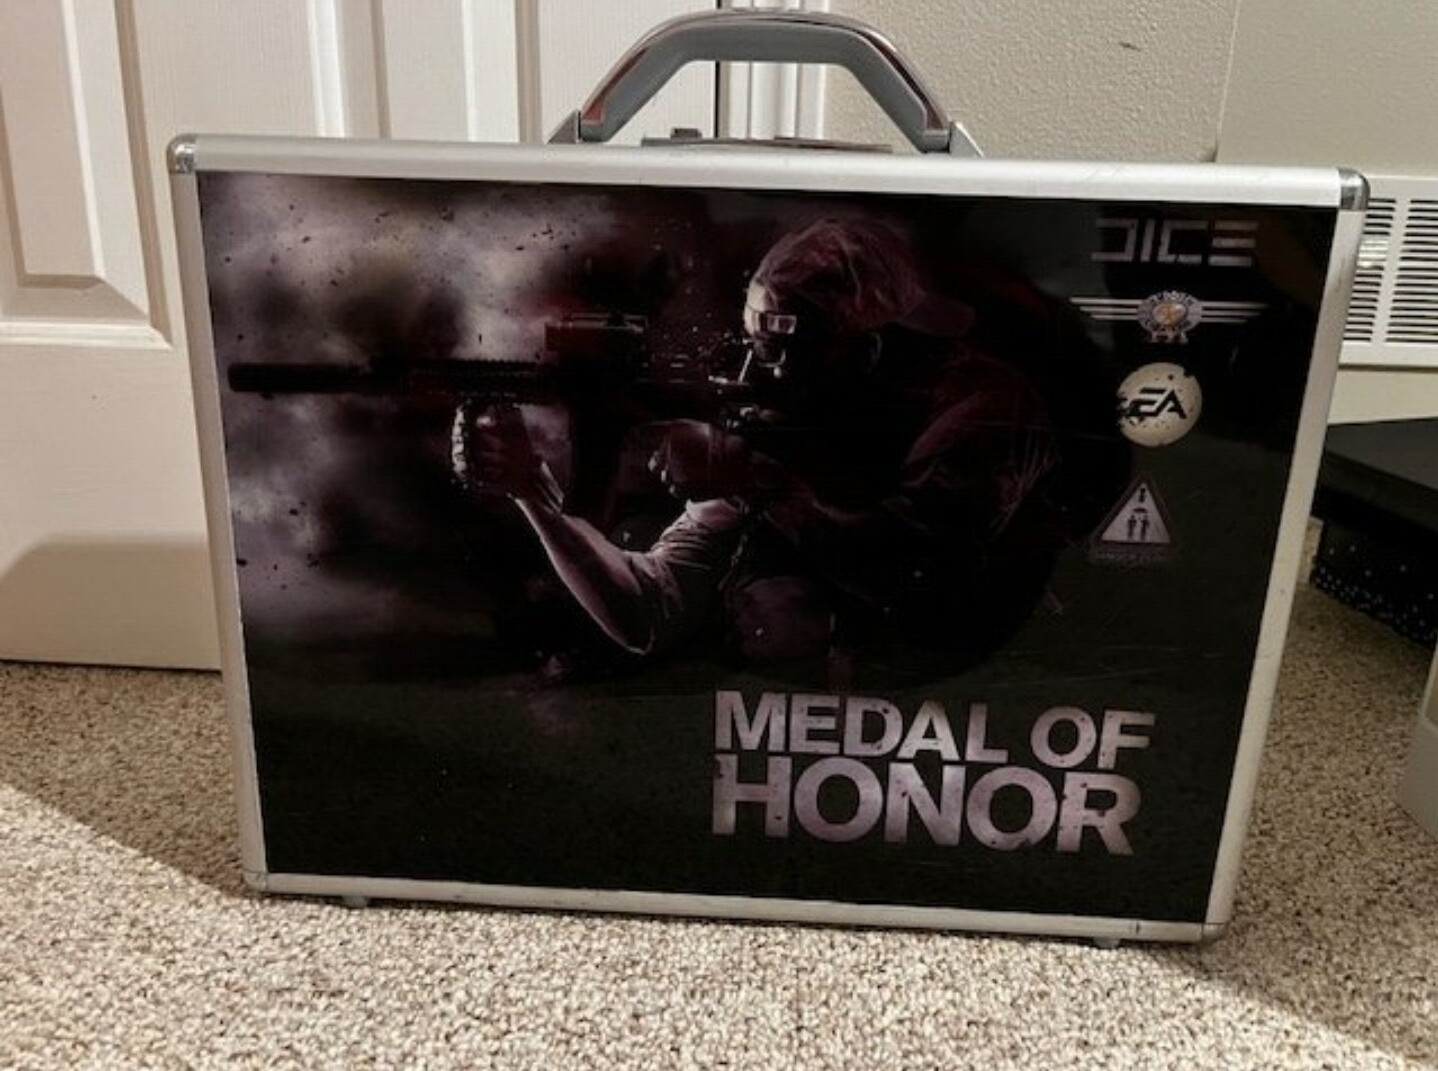  Microsoft Xbox 360 Medal Of Honor Suitcase Alternative Console